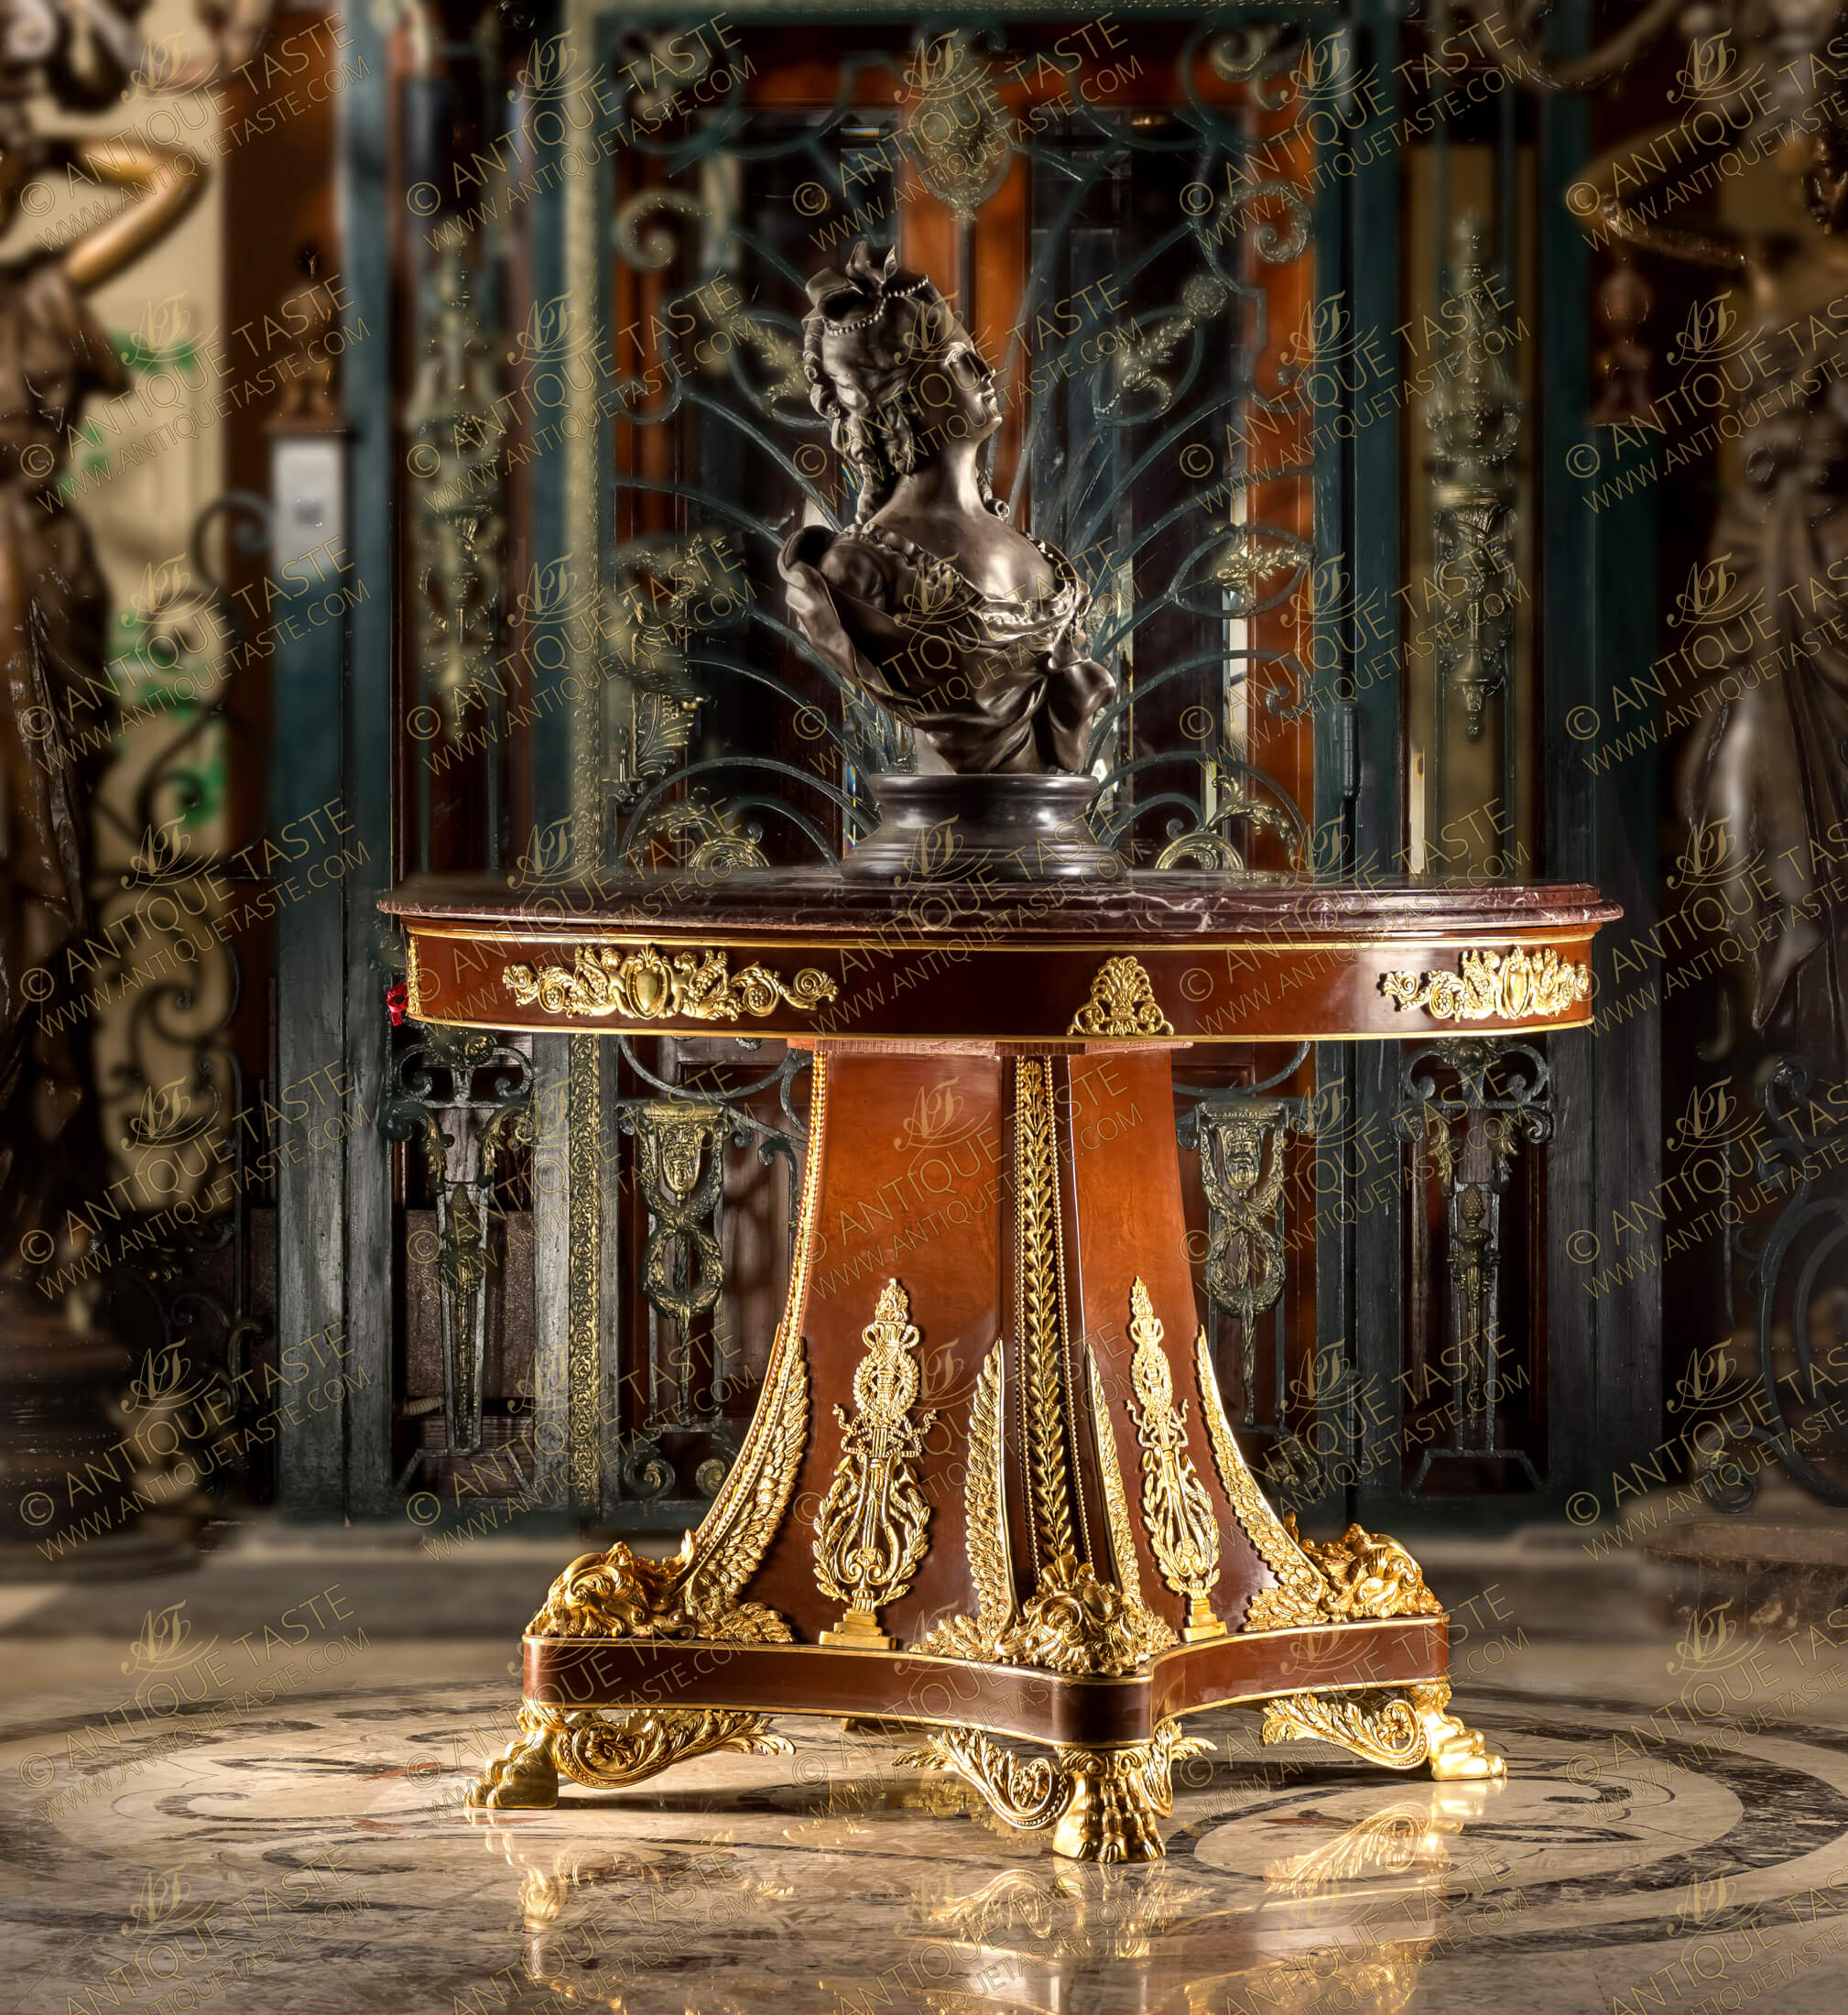 A Majestic and extremely decorative Napoleon III second Empire style ormolu-mounted veneer inlaid and marble topped Center Table richly adorned with luxuriously chased ormolu mounts, resting on striking acanthus paw feet topped with triangular base and central support displays an exceptional curved tapered design ornamented with Empire Neoclassical ormolu mounts leading to the marble topped ormolu mounted circular top